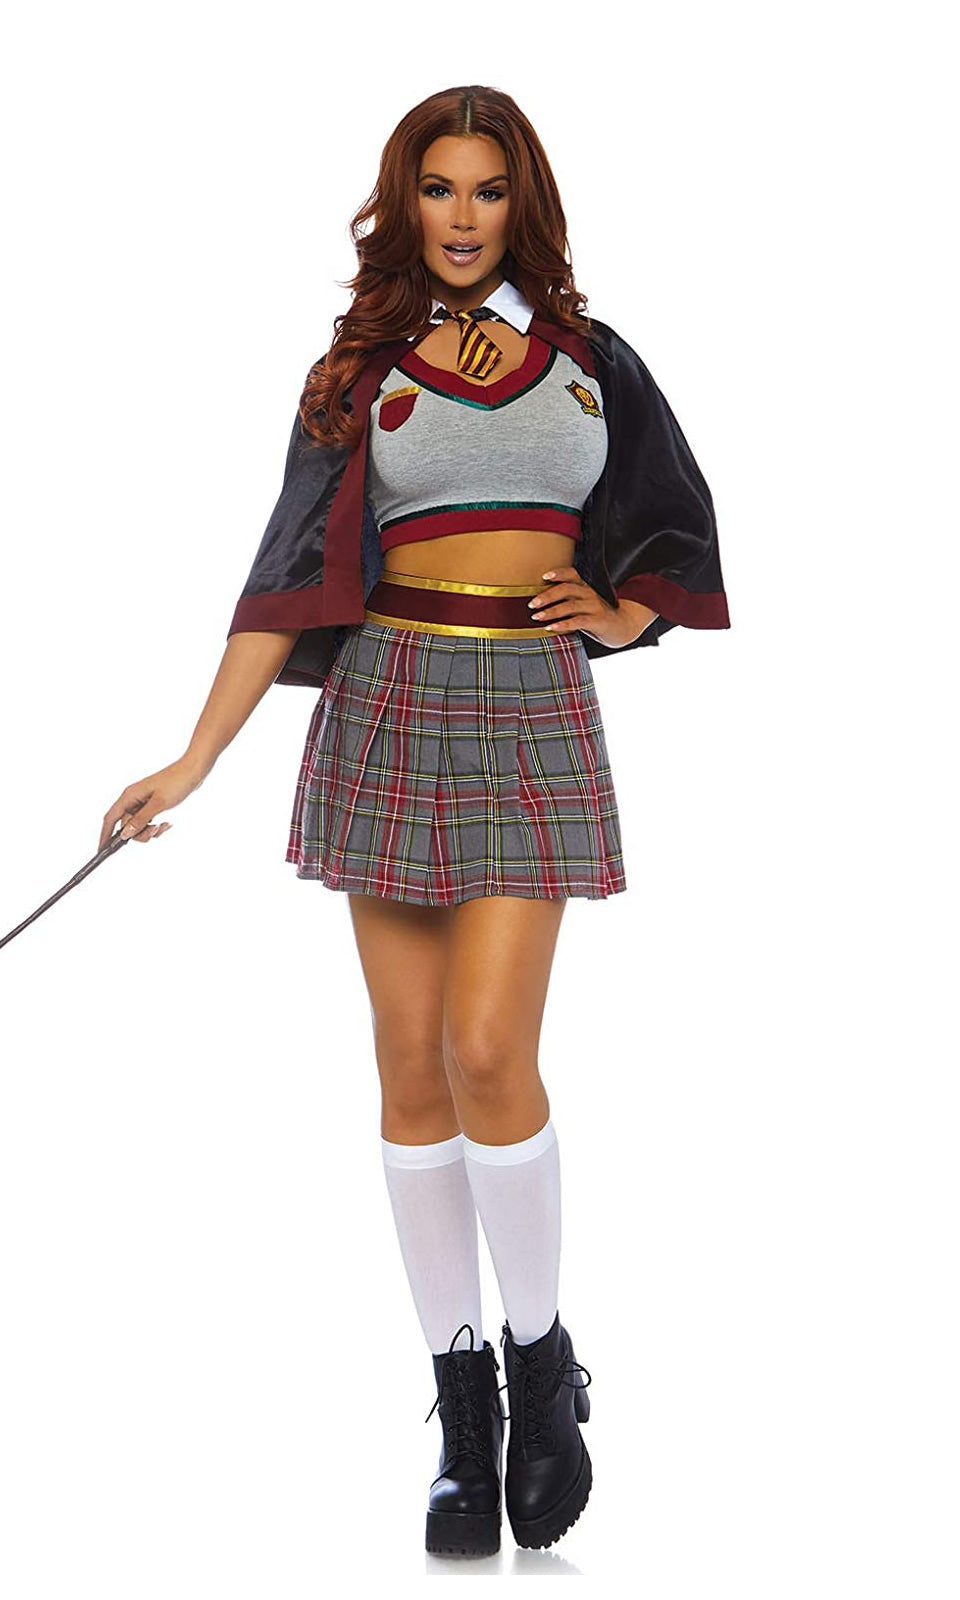 Harry Potter style school girl dress with cape, collar and tie